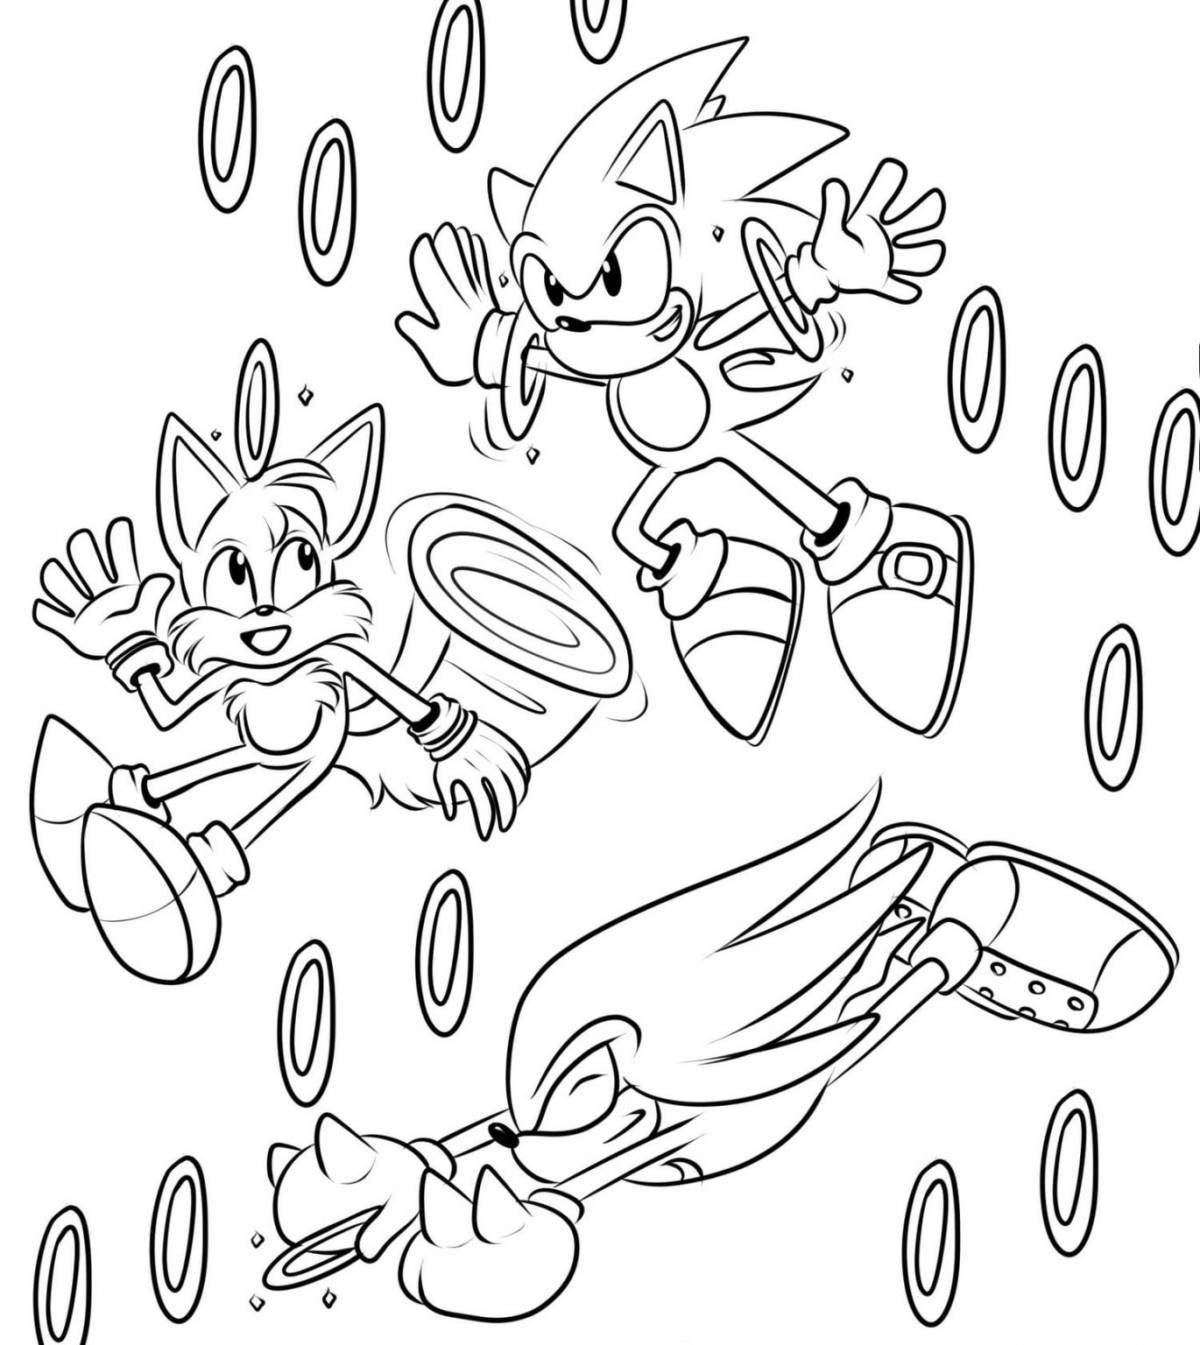 Sonic mania dazzling coloring book